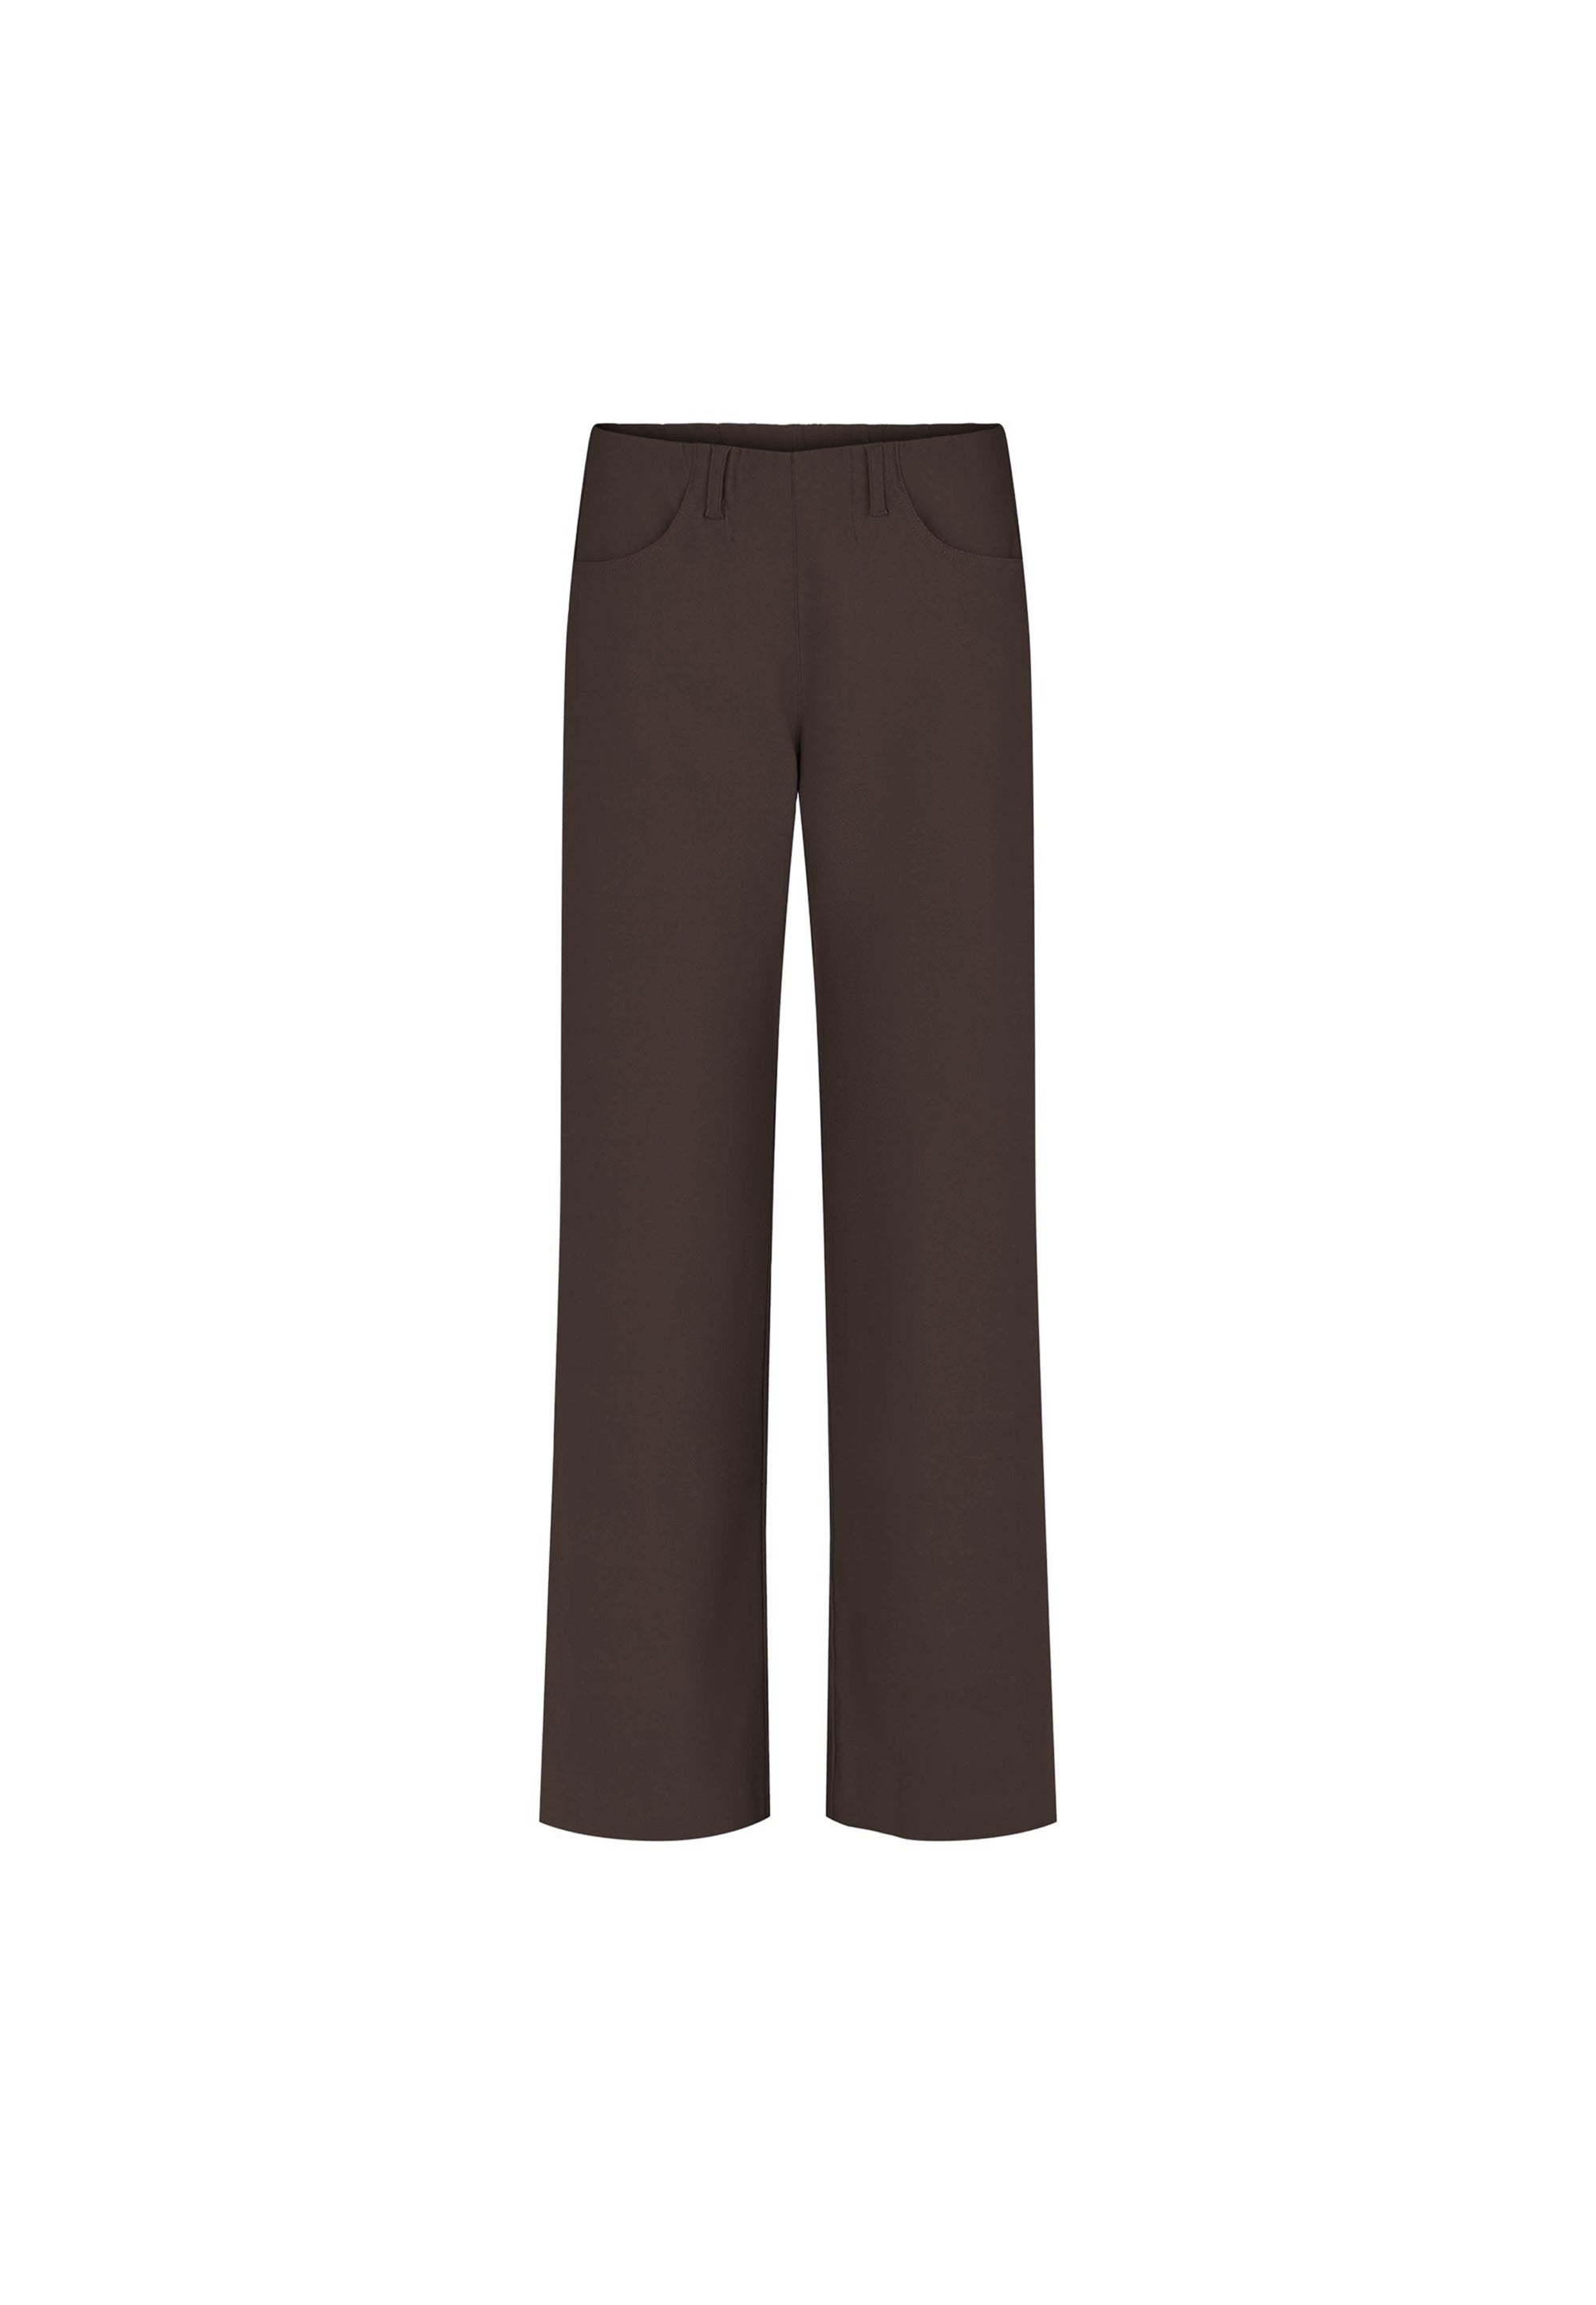 LAURIE Donna Loose - Medium Length Trousers LOOSE 88000 Brown